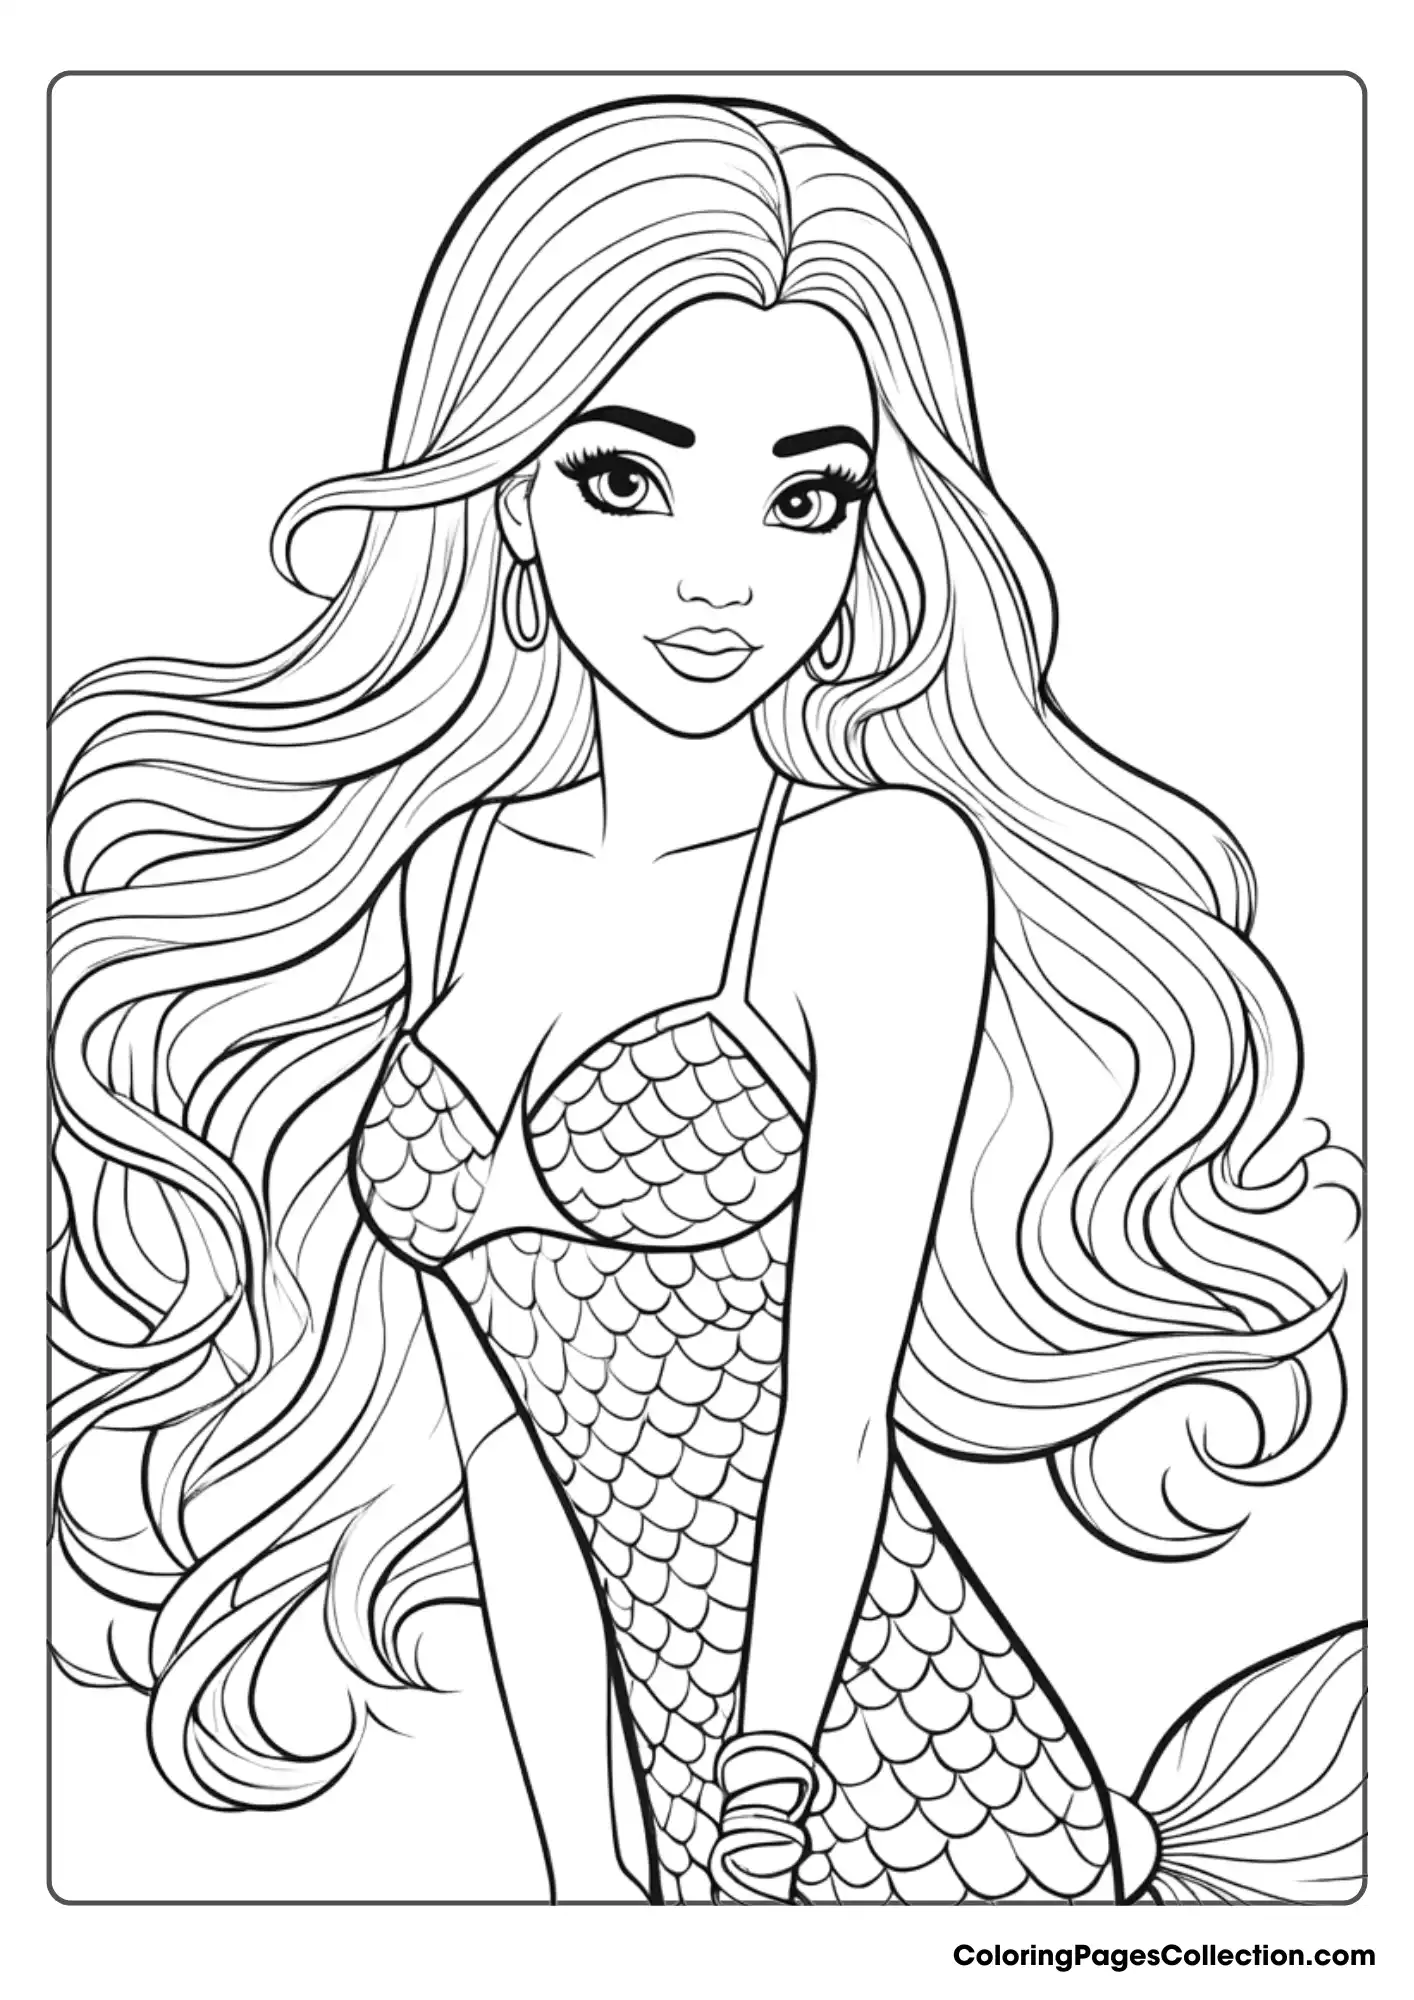 Coloring pages for teens, Cute Mermaid